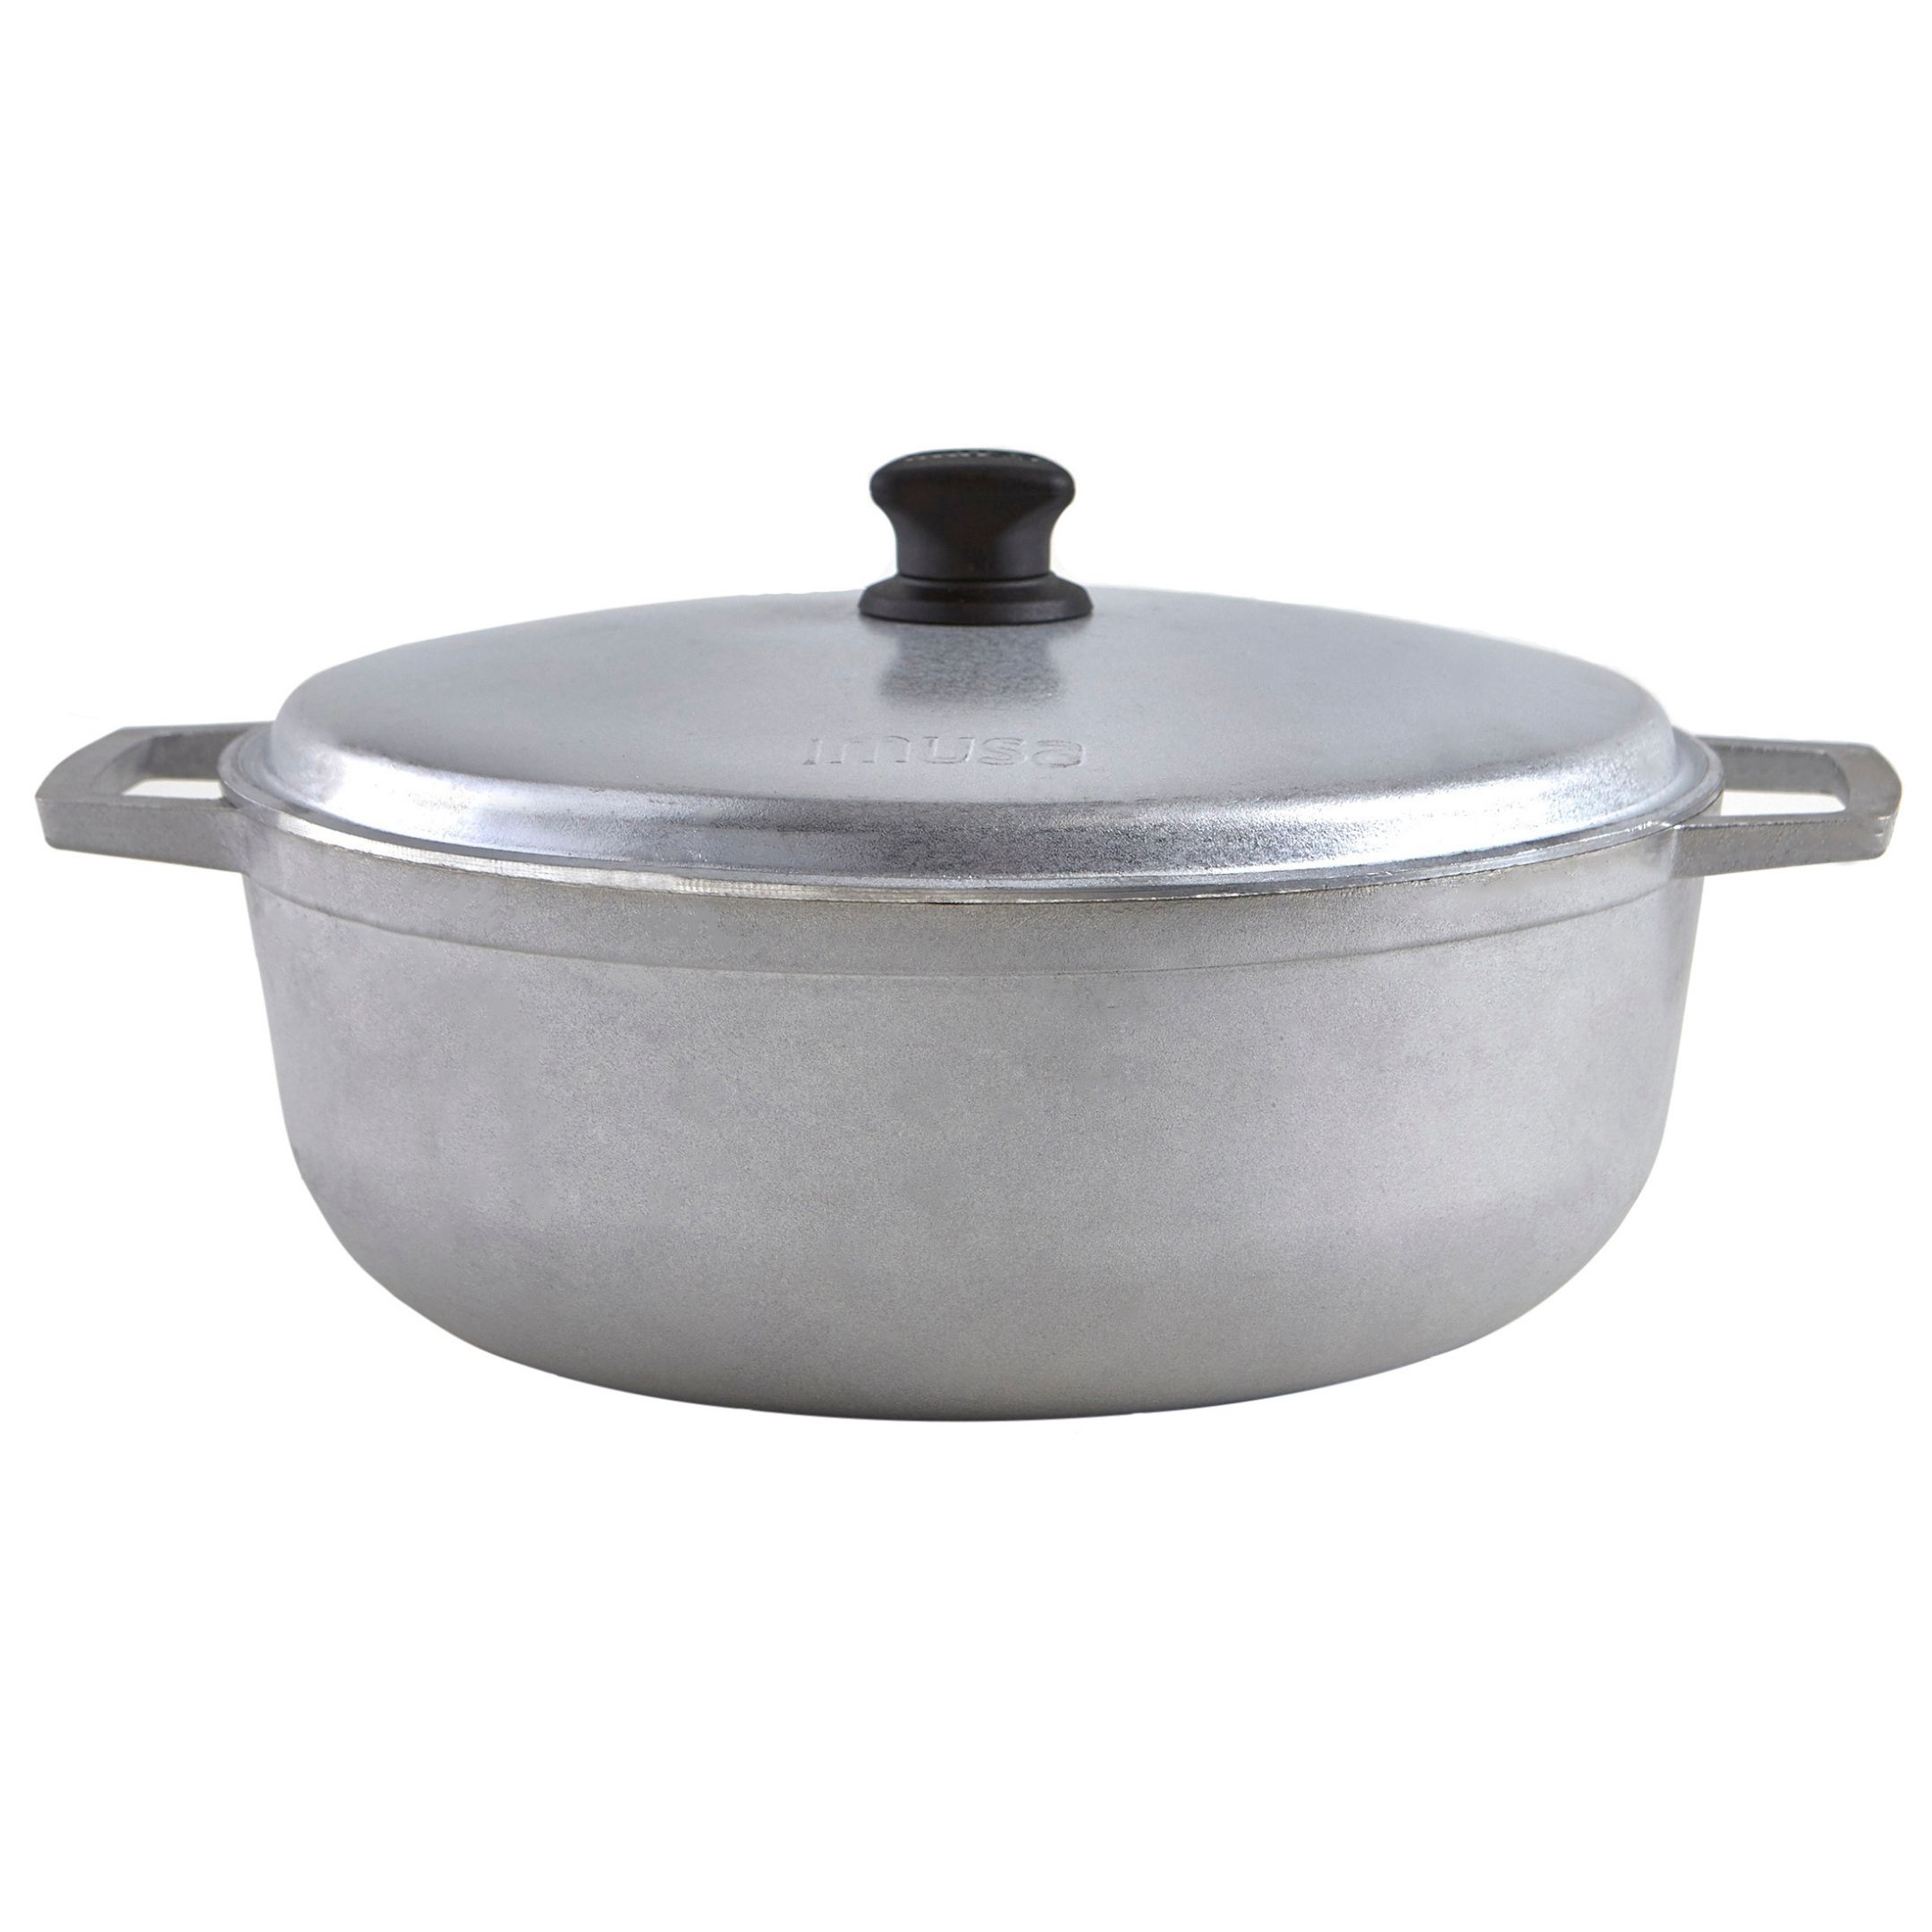 Imusa 11.6 Quart Cast Aluminum Traditional Colombian Caldero or Dutch Oven with Lid - image 1 of 12